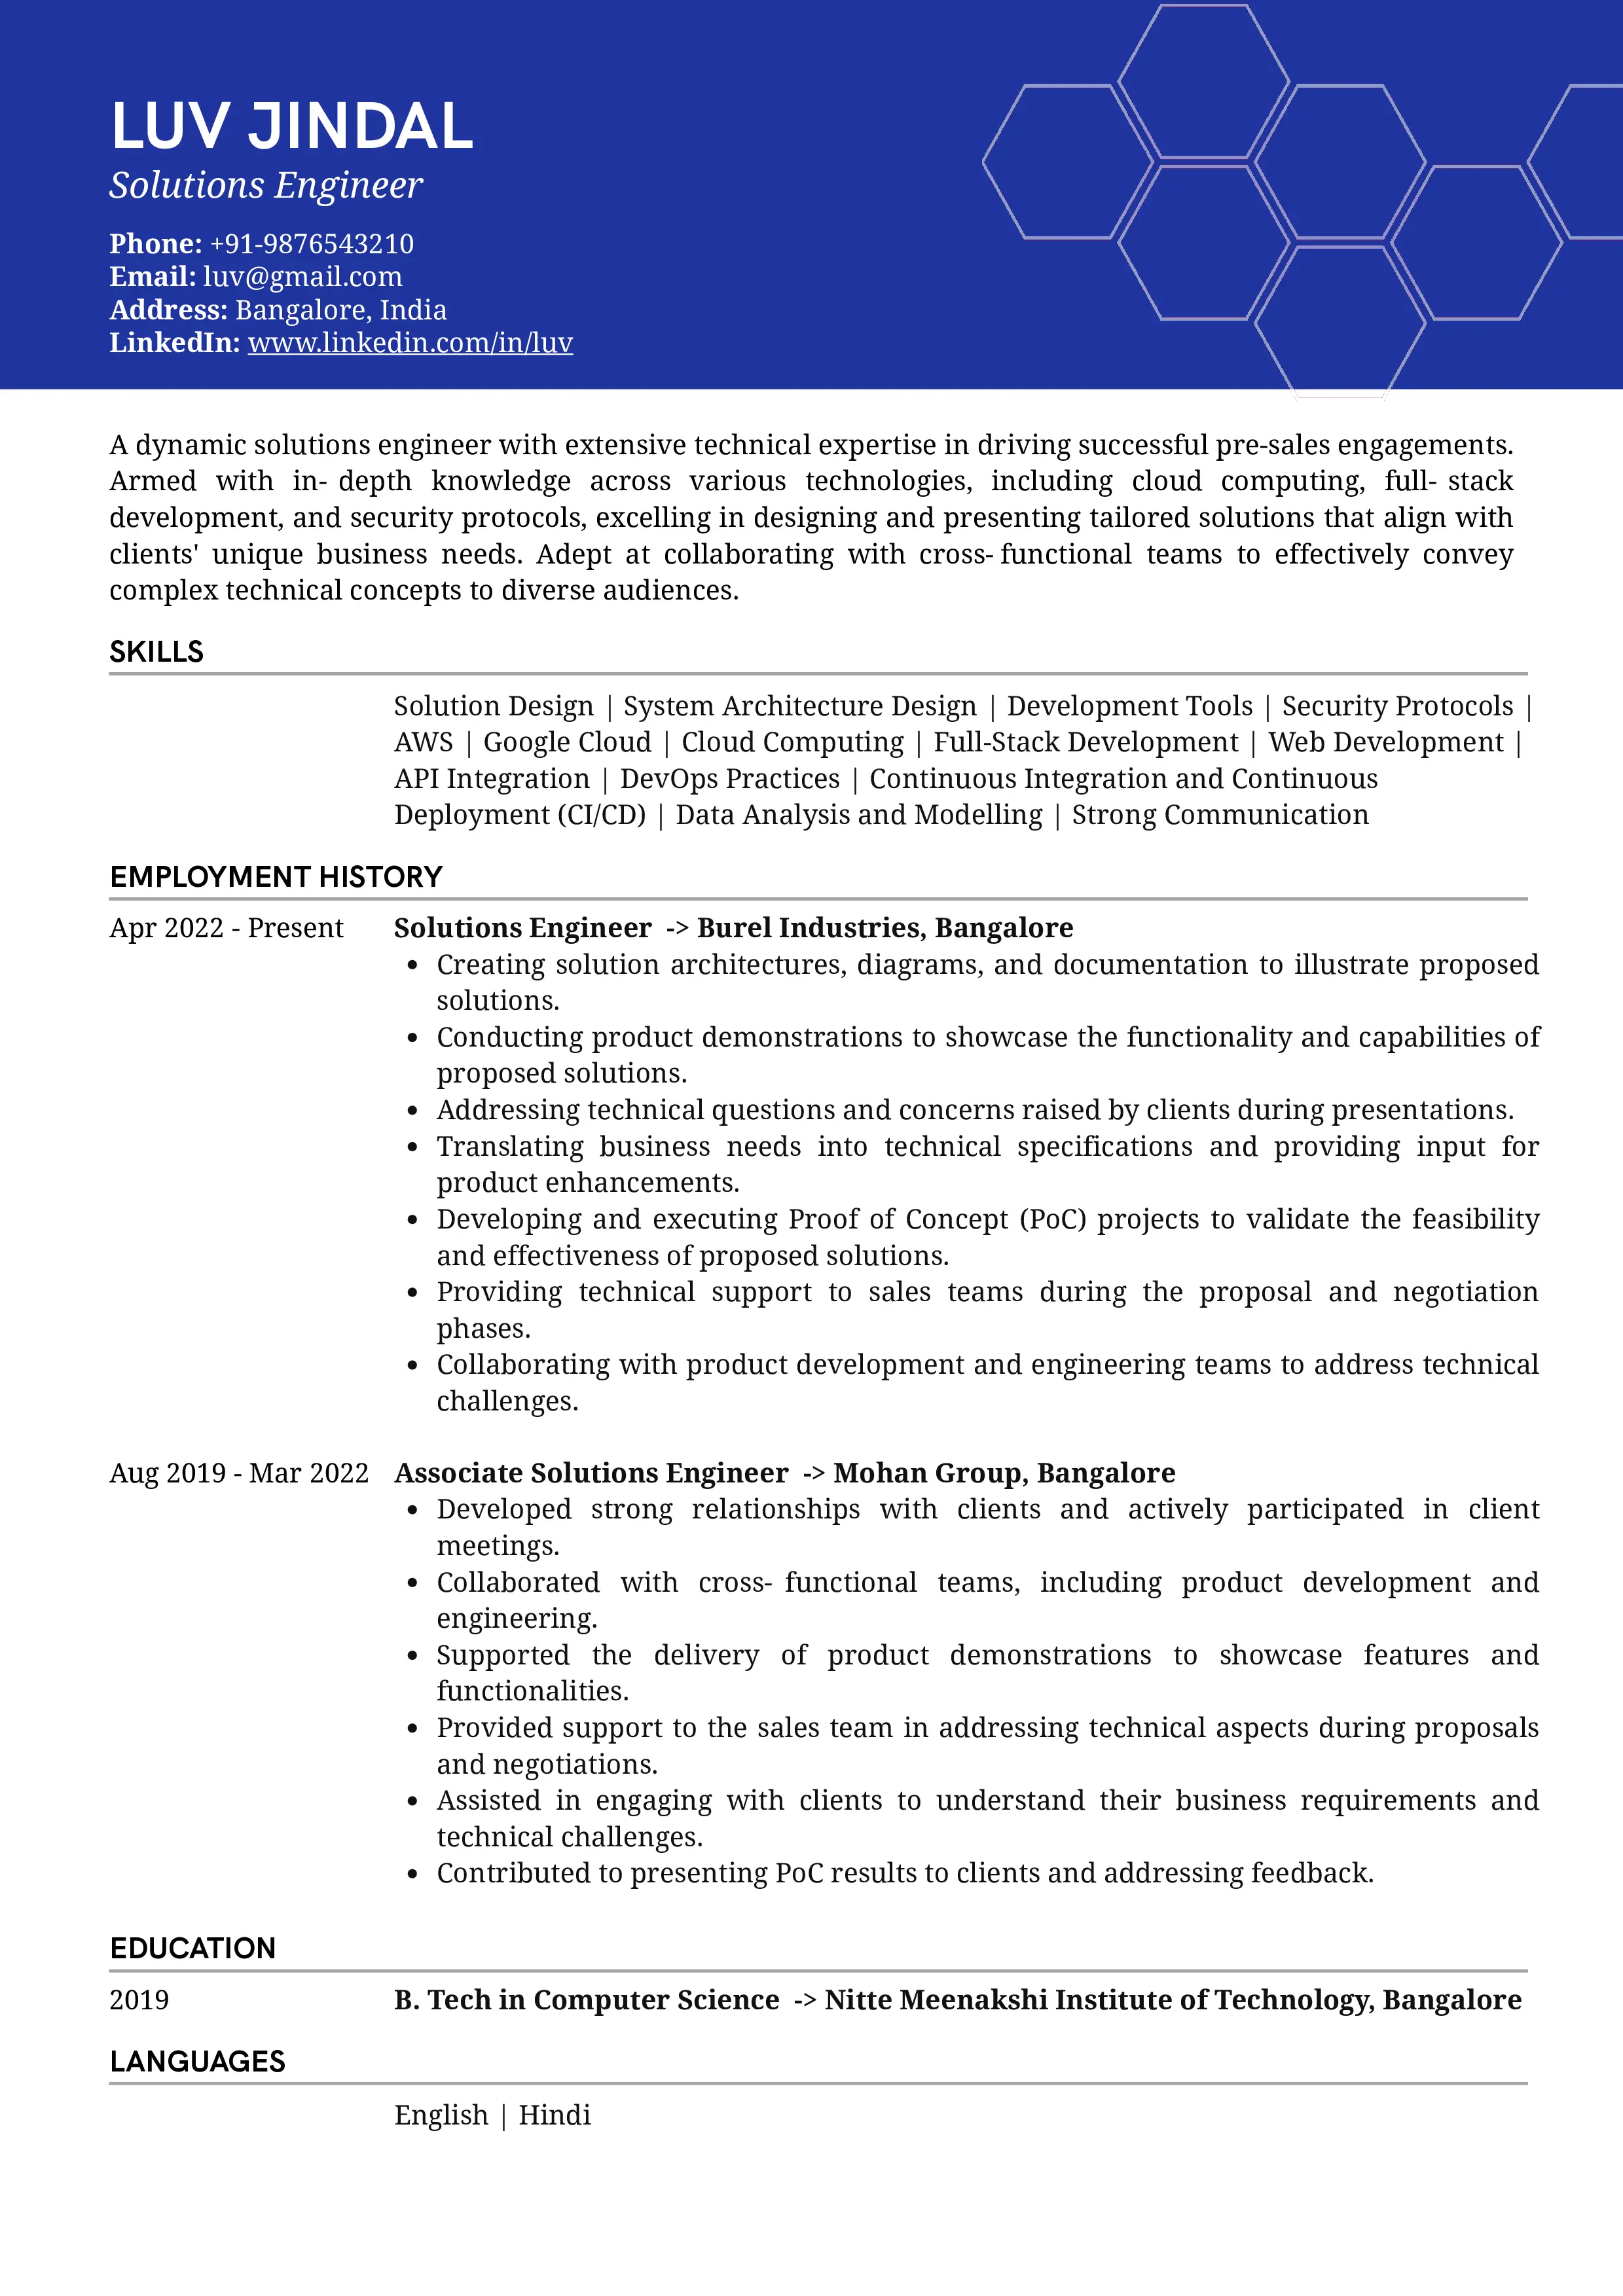 Sample Resume of Solutions Engineer | Free Resume Templates & Samples on Resumod.co